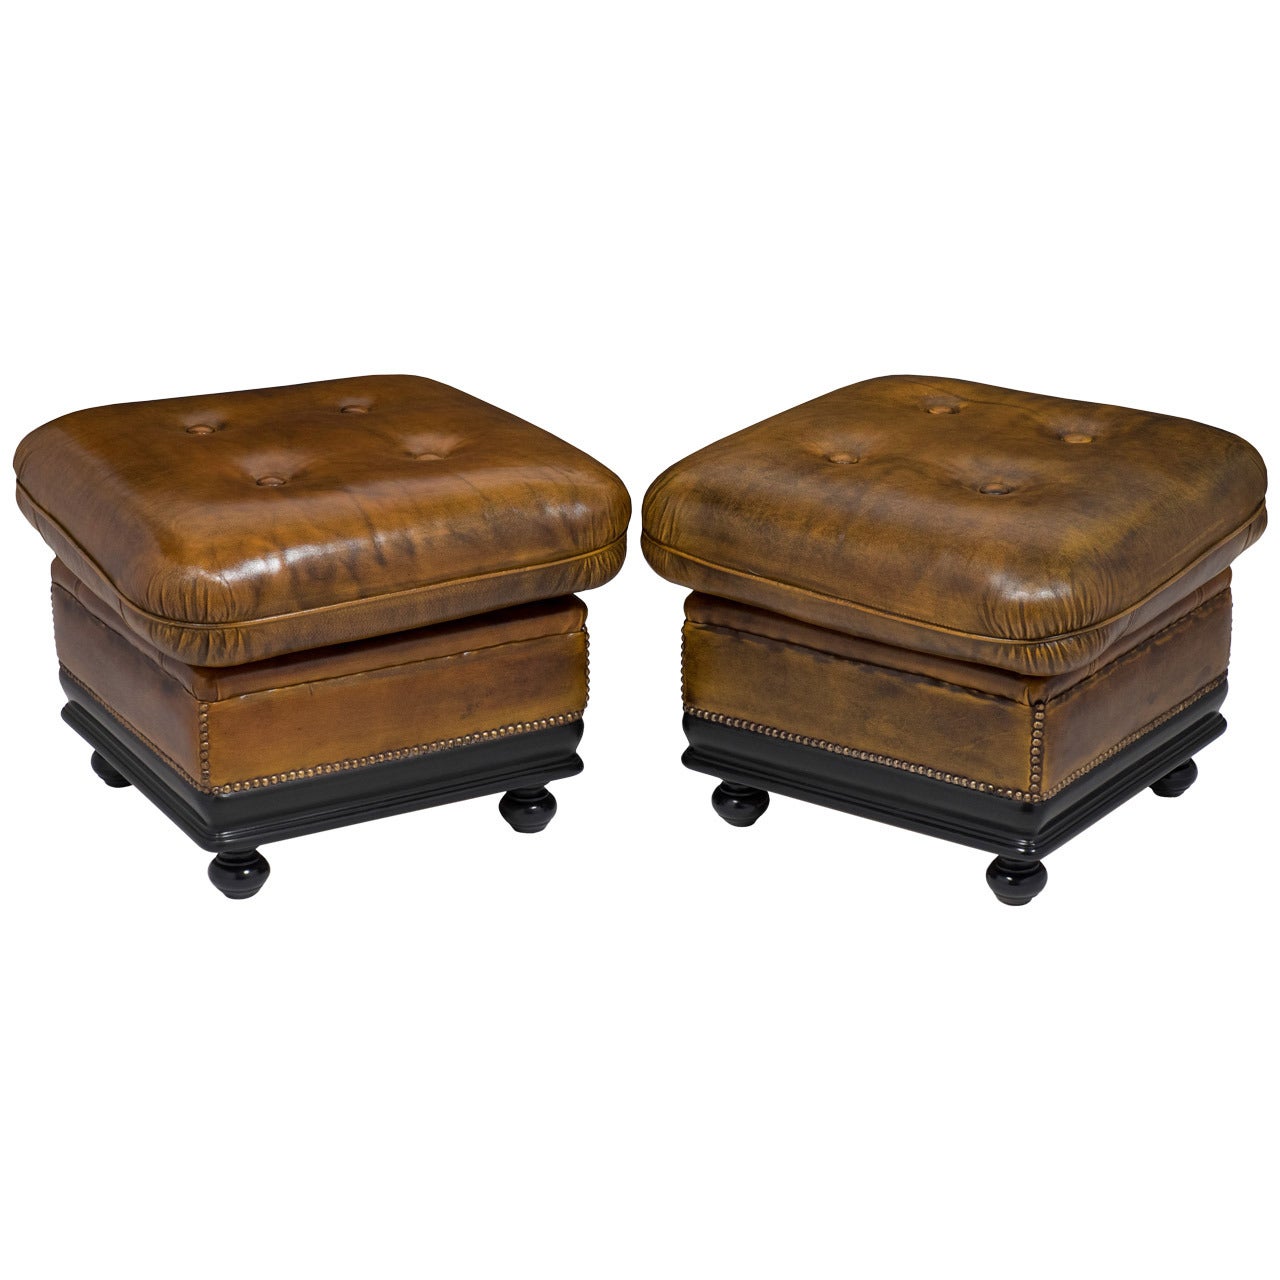 Vintage Pair of Leather Ottomans